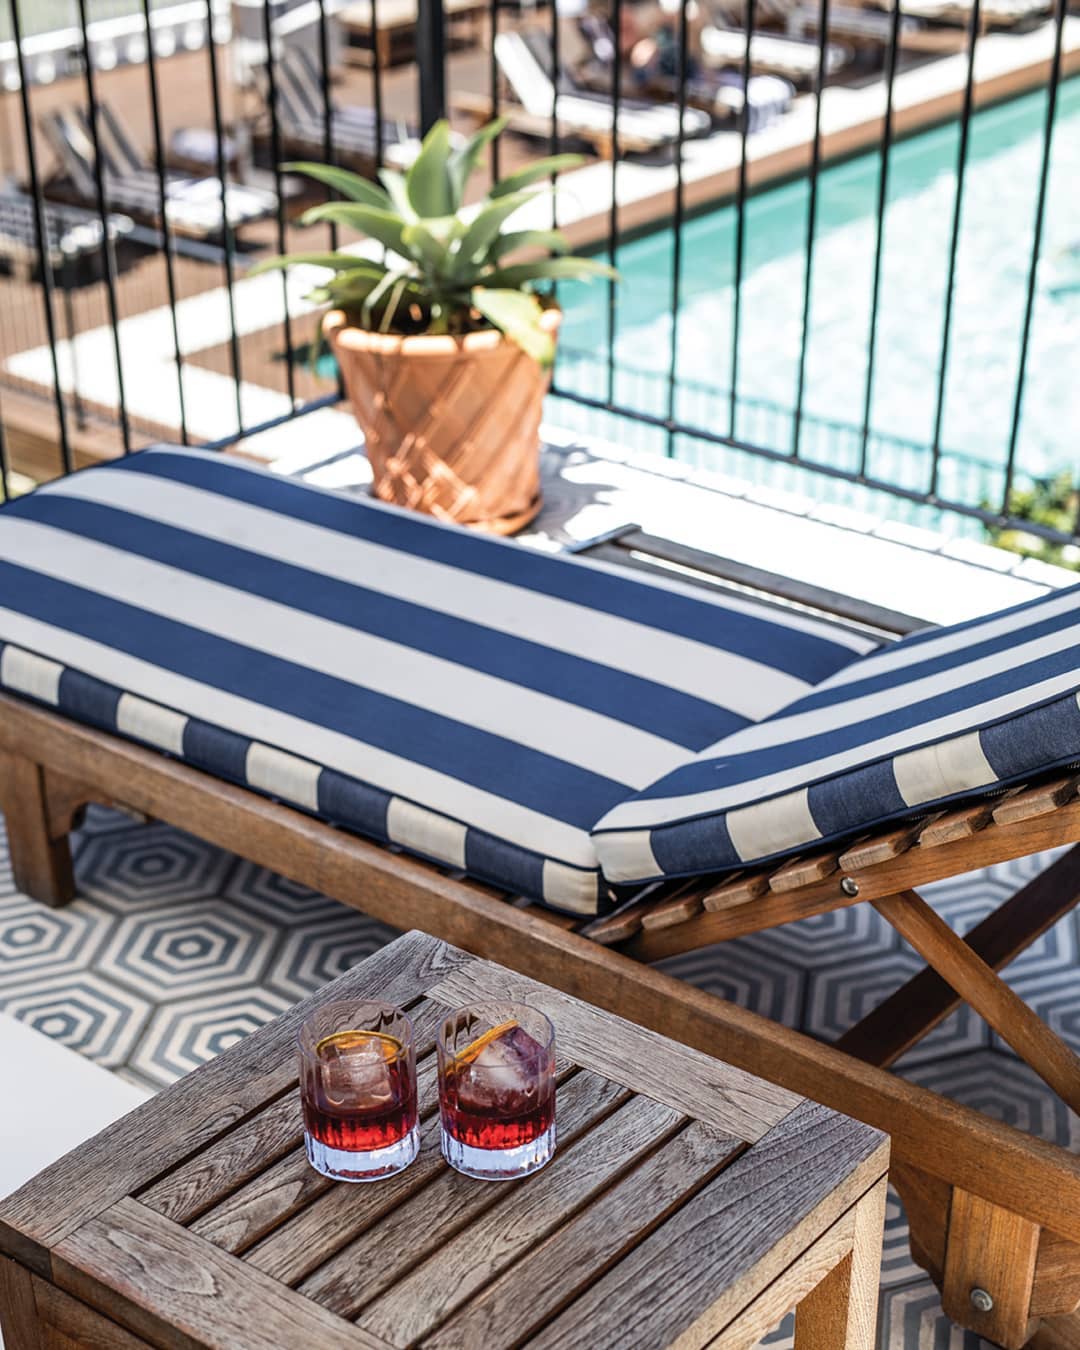 negronis by the pool at halcyon house